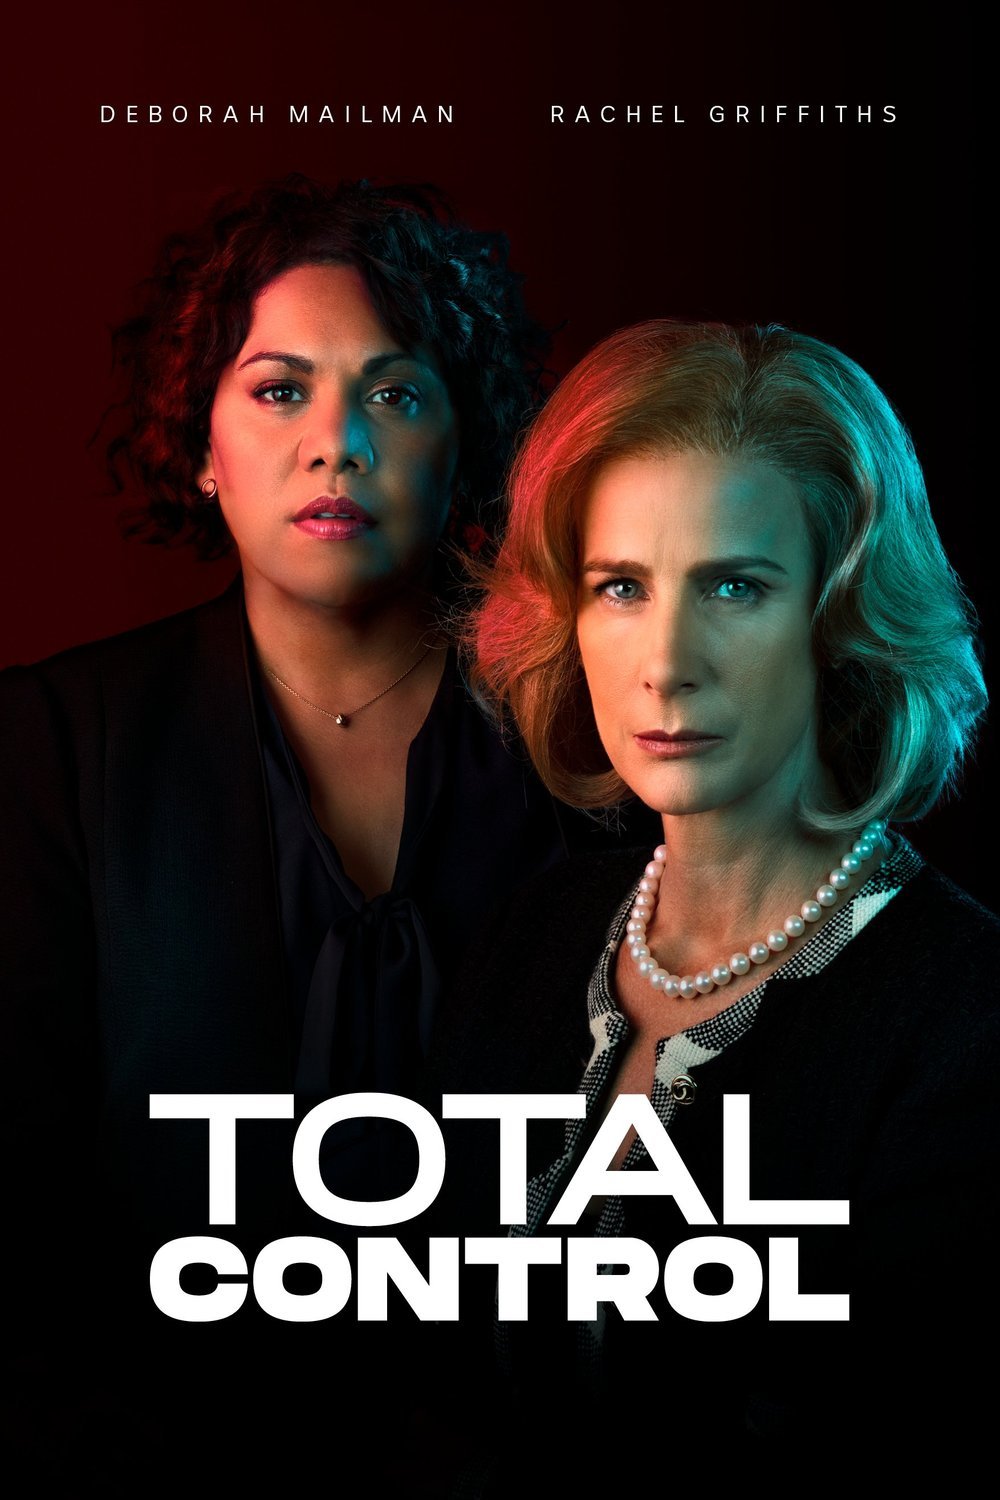 Poster of the movie Total Control